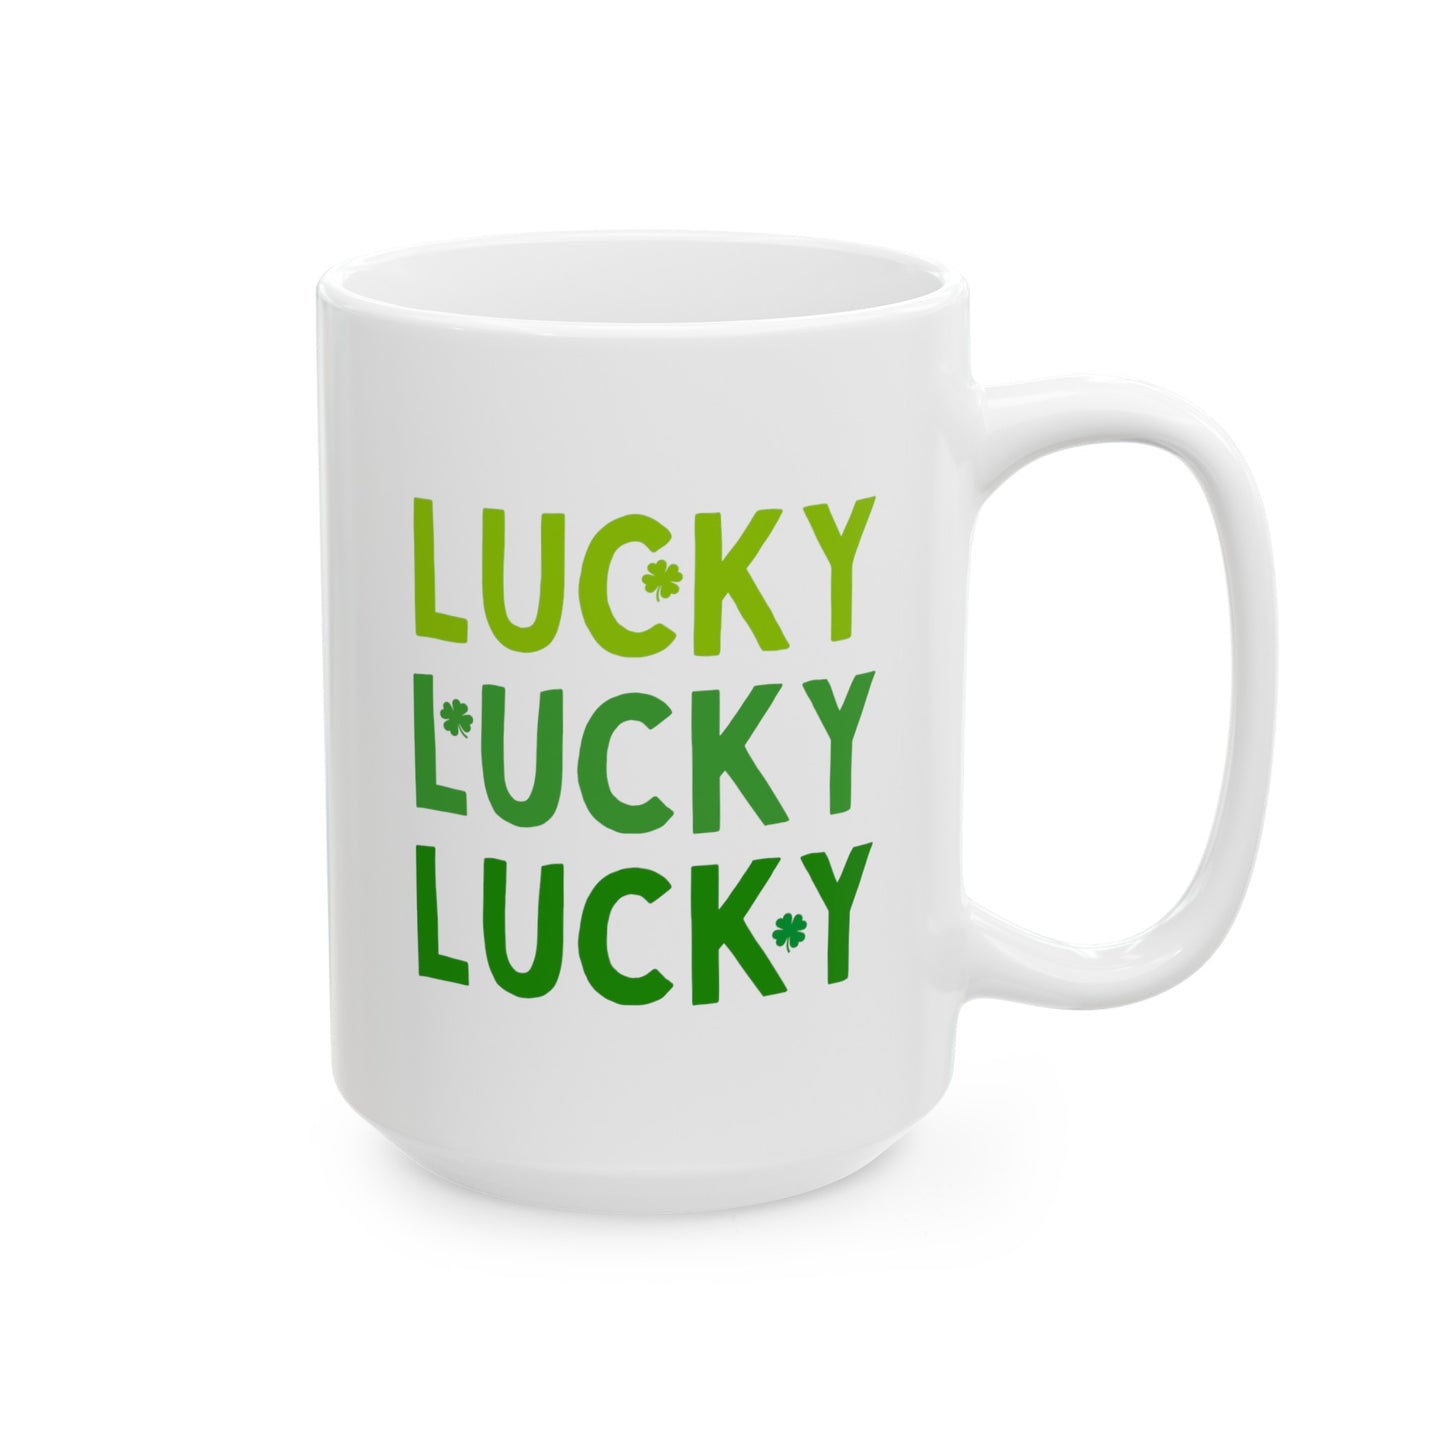 Lucky Lucky Lucky 15oz white funny large big coffee mug tea cup gift for st pattys day saint patricks luck Irish holiday shamrock green shenanigans waveywares wavey wares wavywares wavy wares